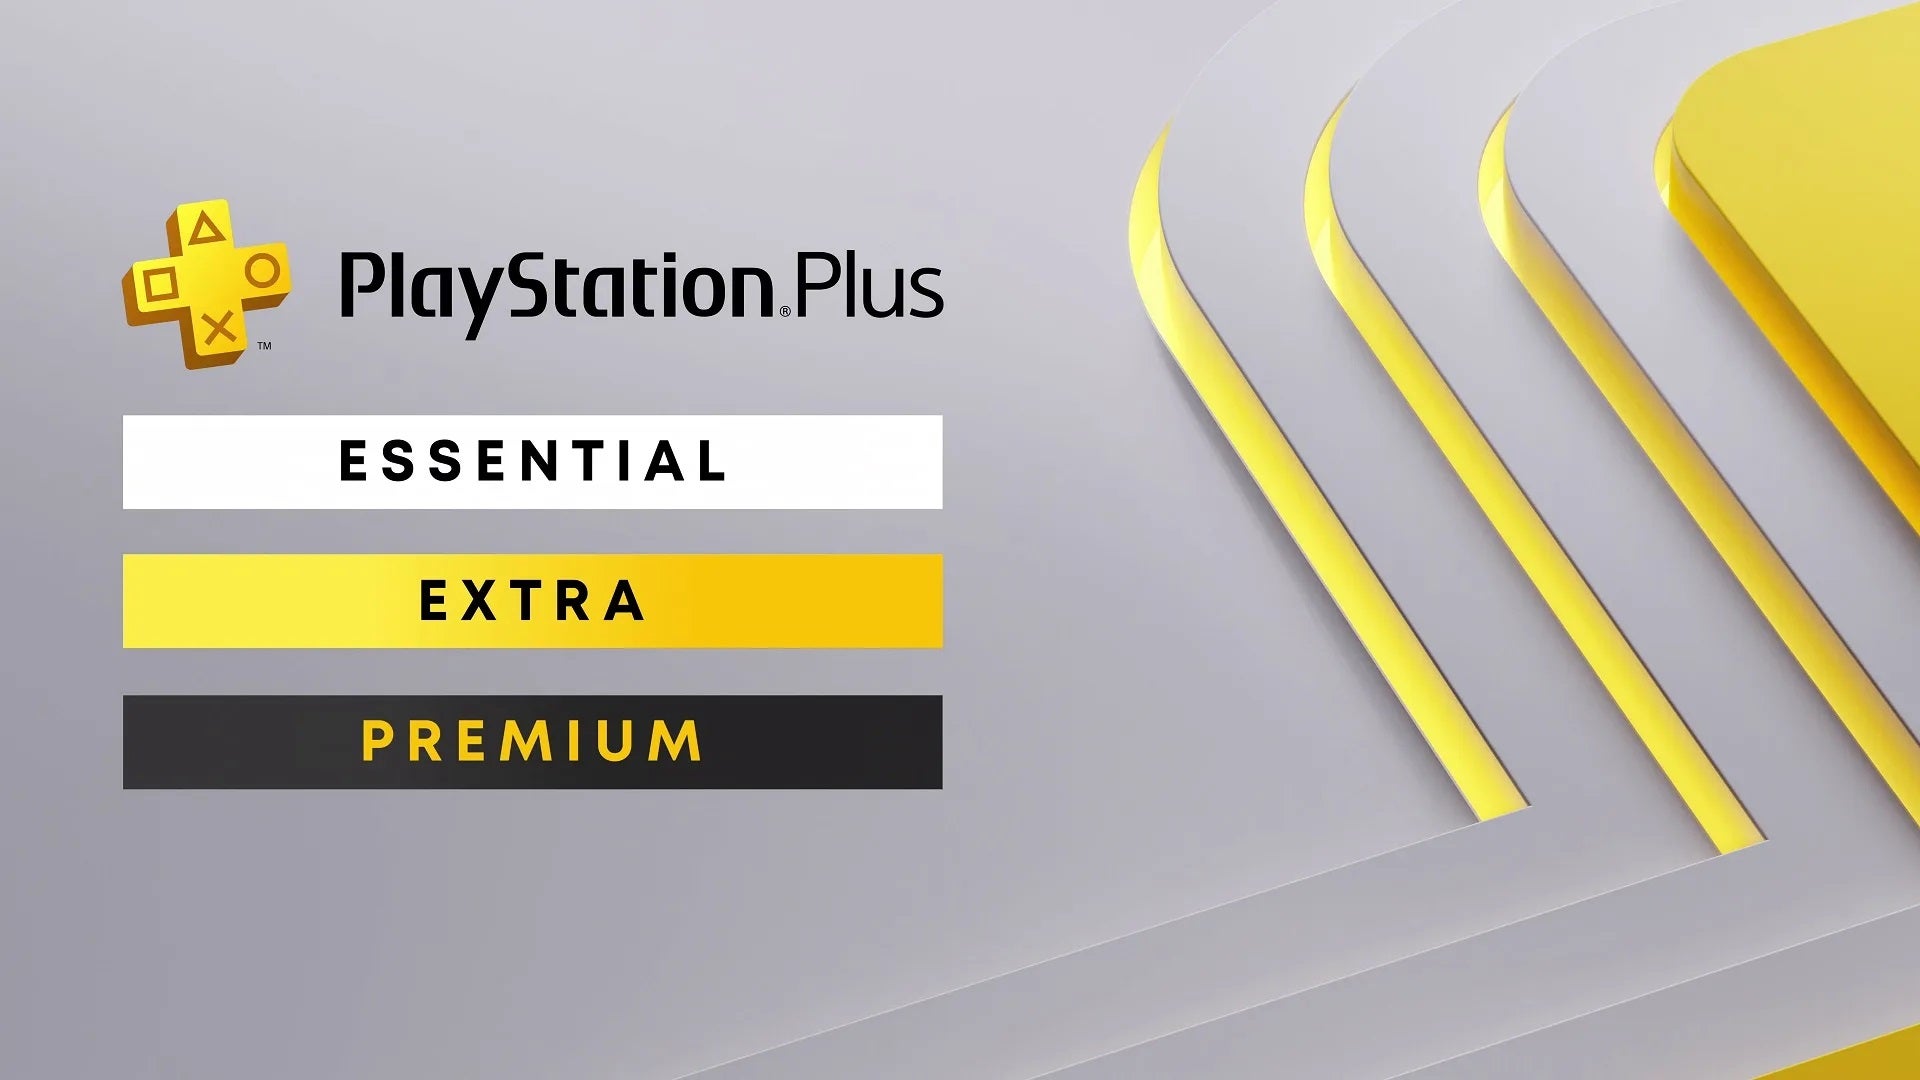 Playstation Plus logo and tiers